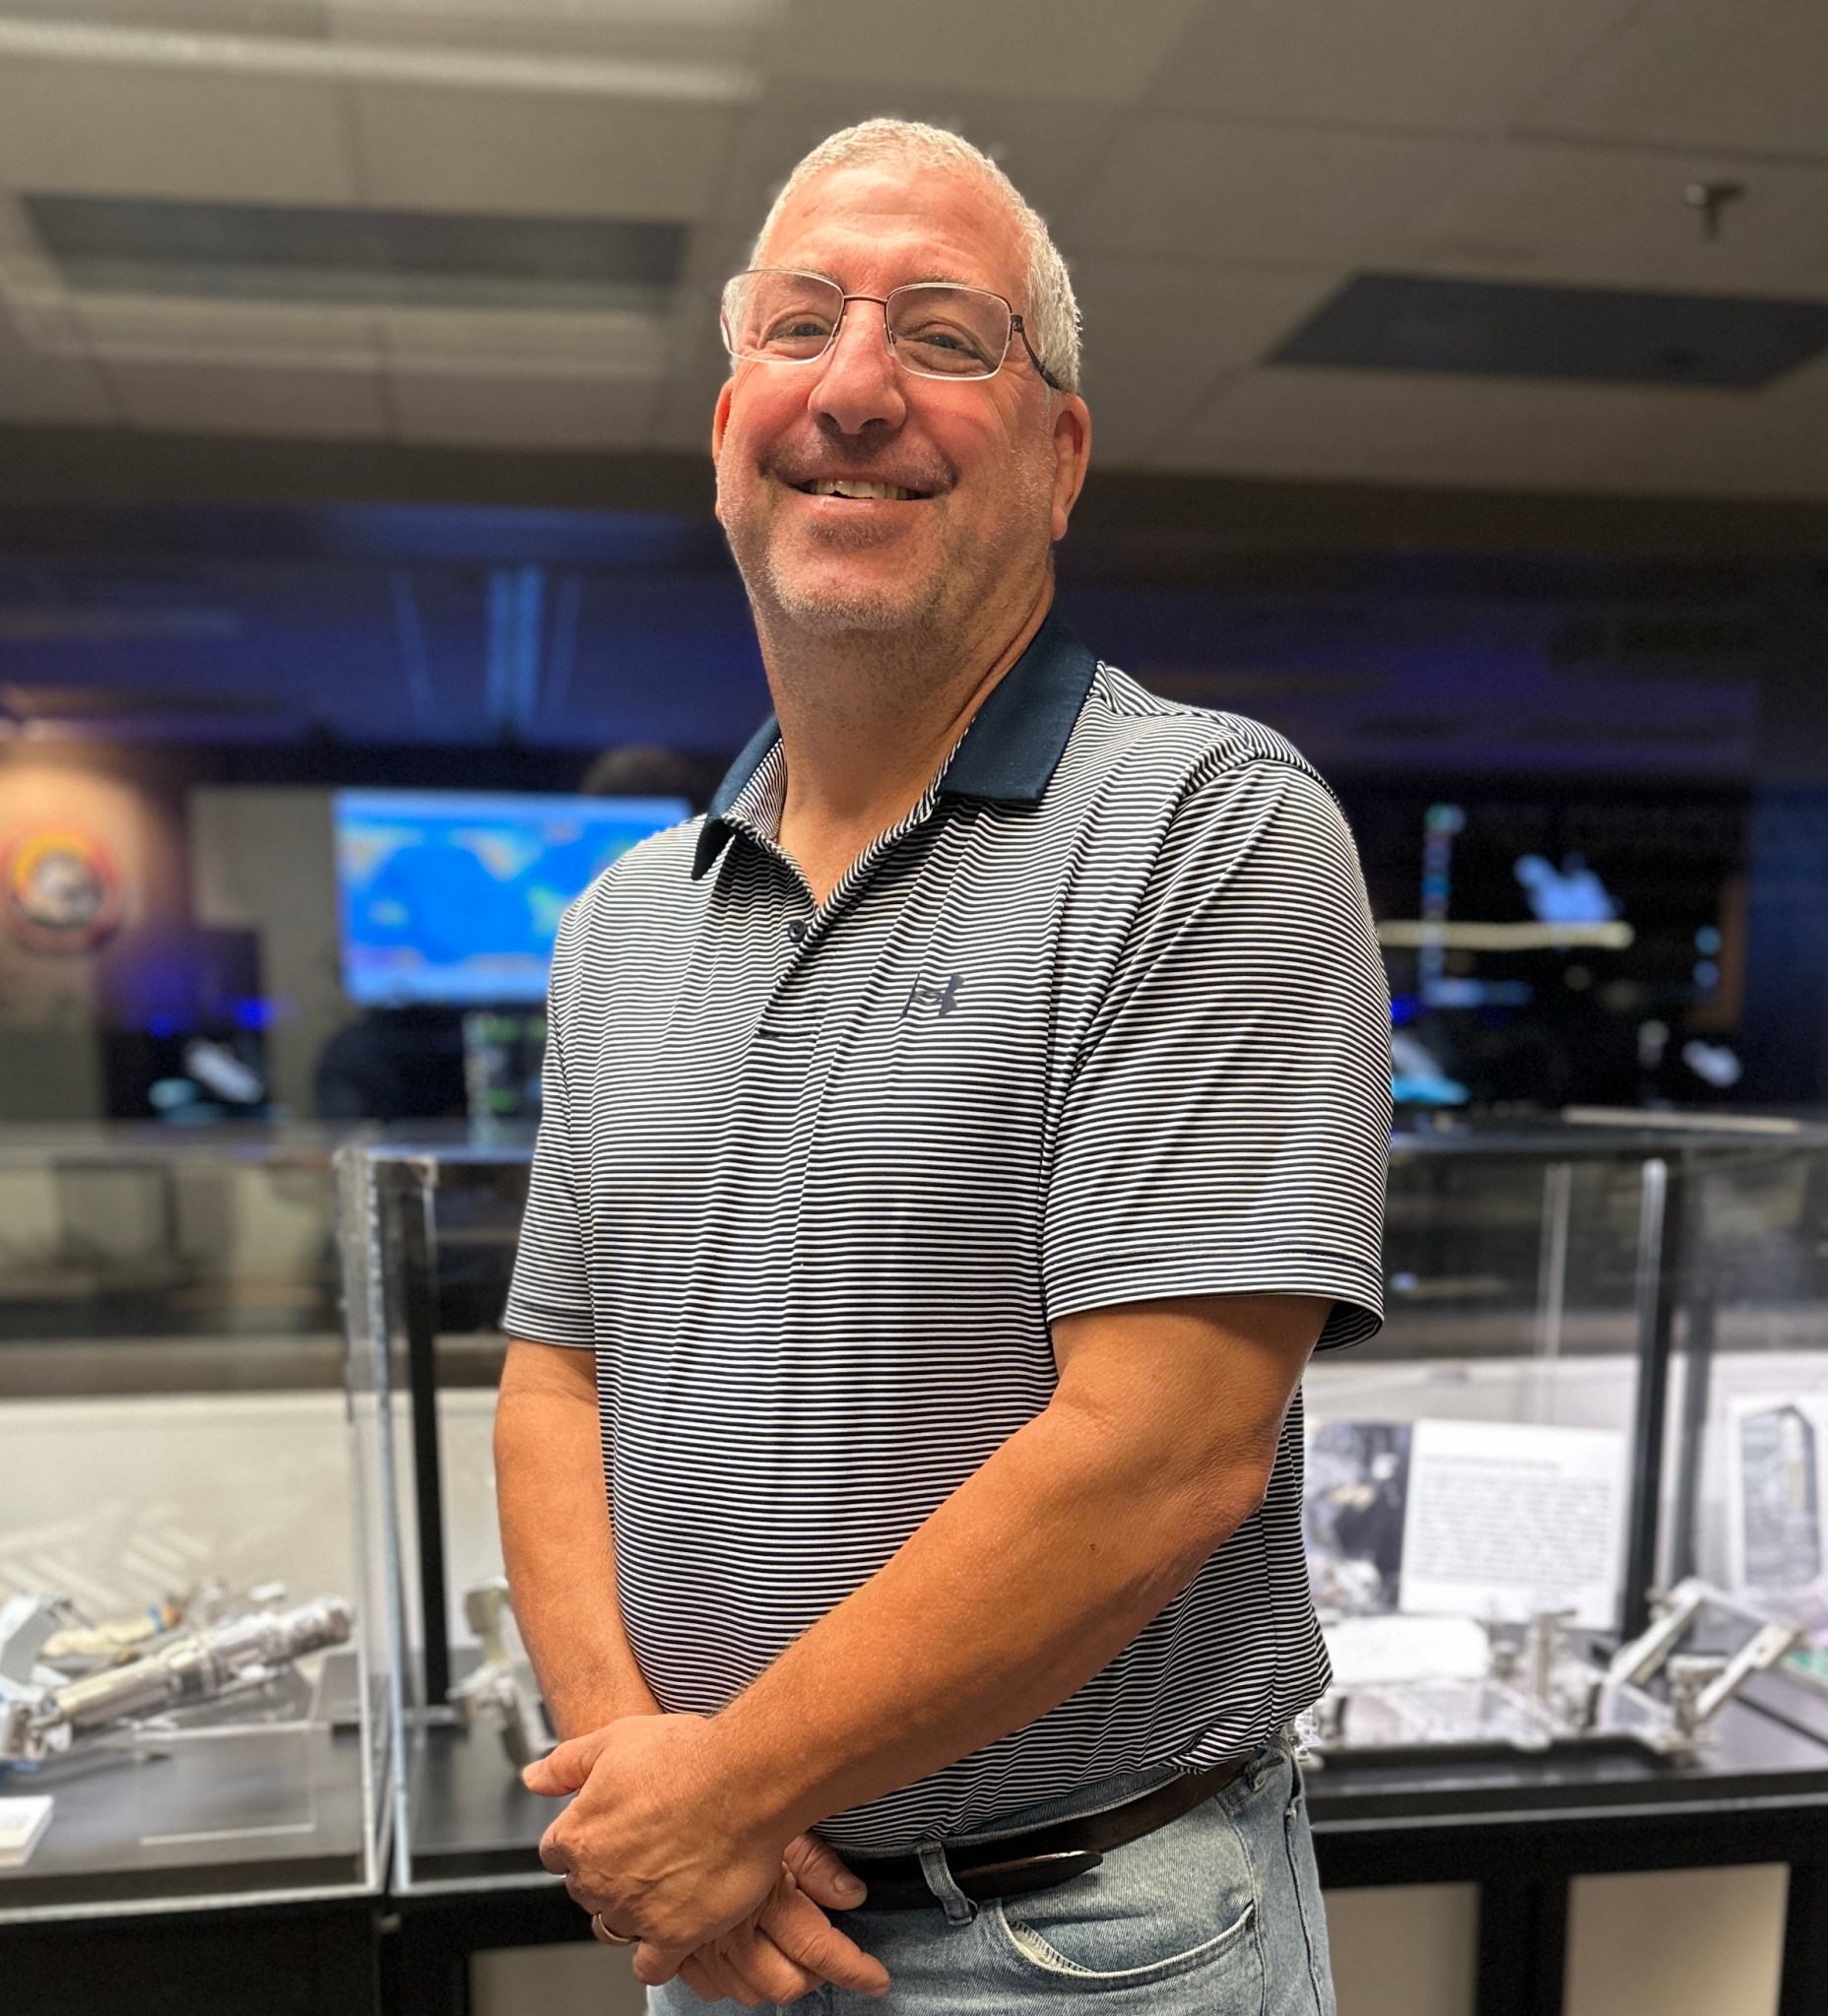 Steve Arslanian, a man with white hair and glasses, smiles and stands with hands folded in front of him, wearing a navy striped polo shirt and faded jeans. He stands in front of display cases and the Hubble control room with monitors in the background.